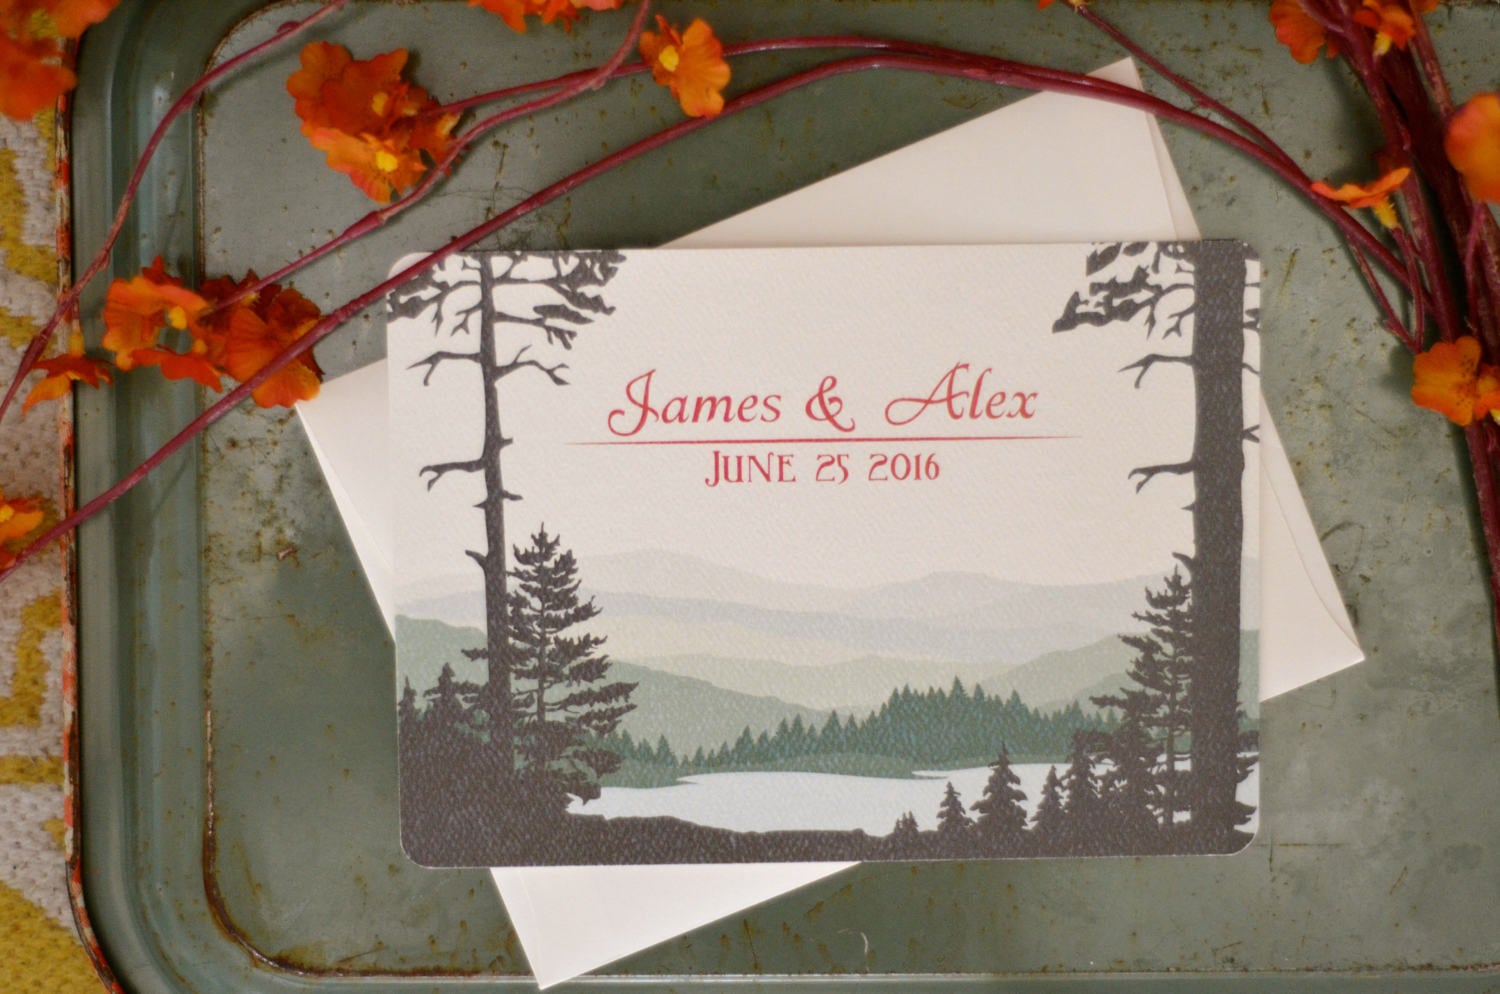 Appalachian Mountains with river valley Wedding Invitation  5x7 Invitation with A7 Envelope